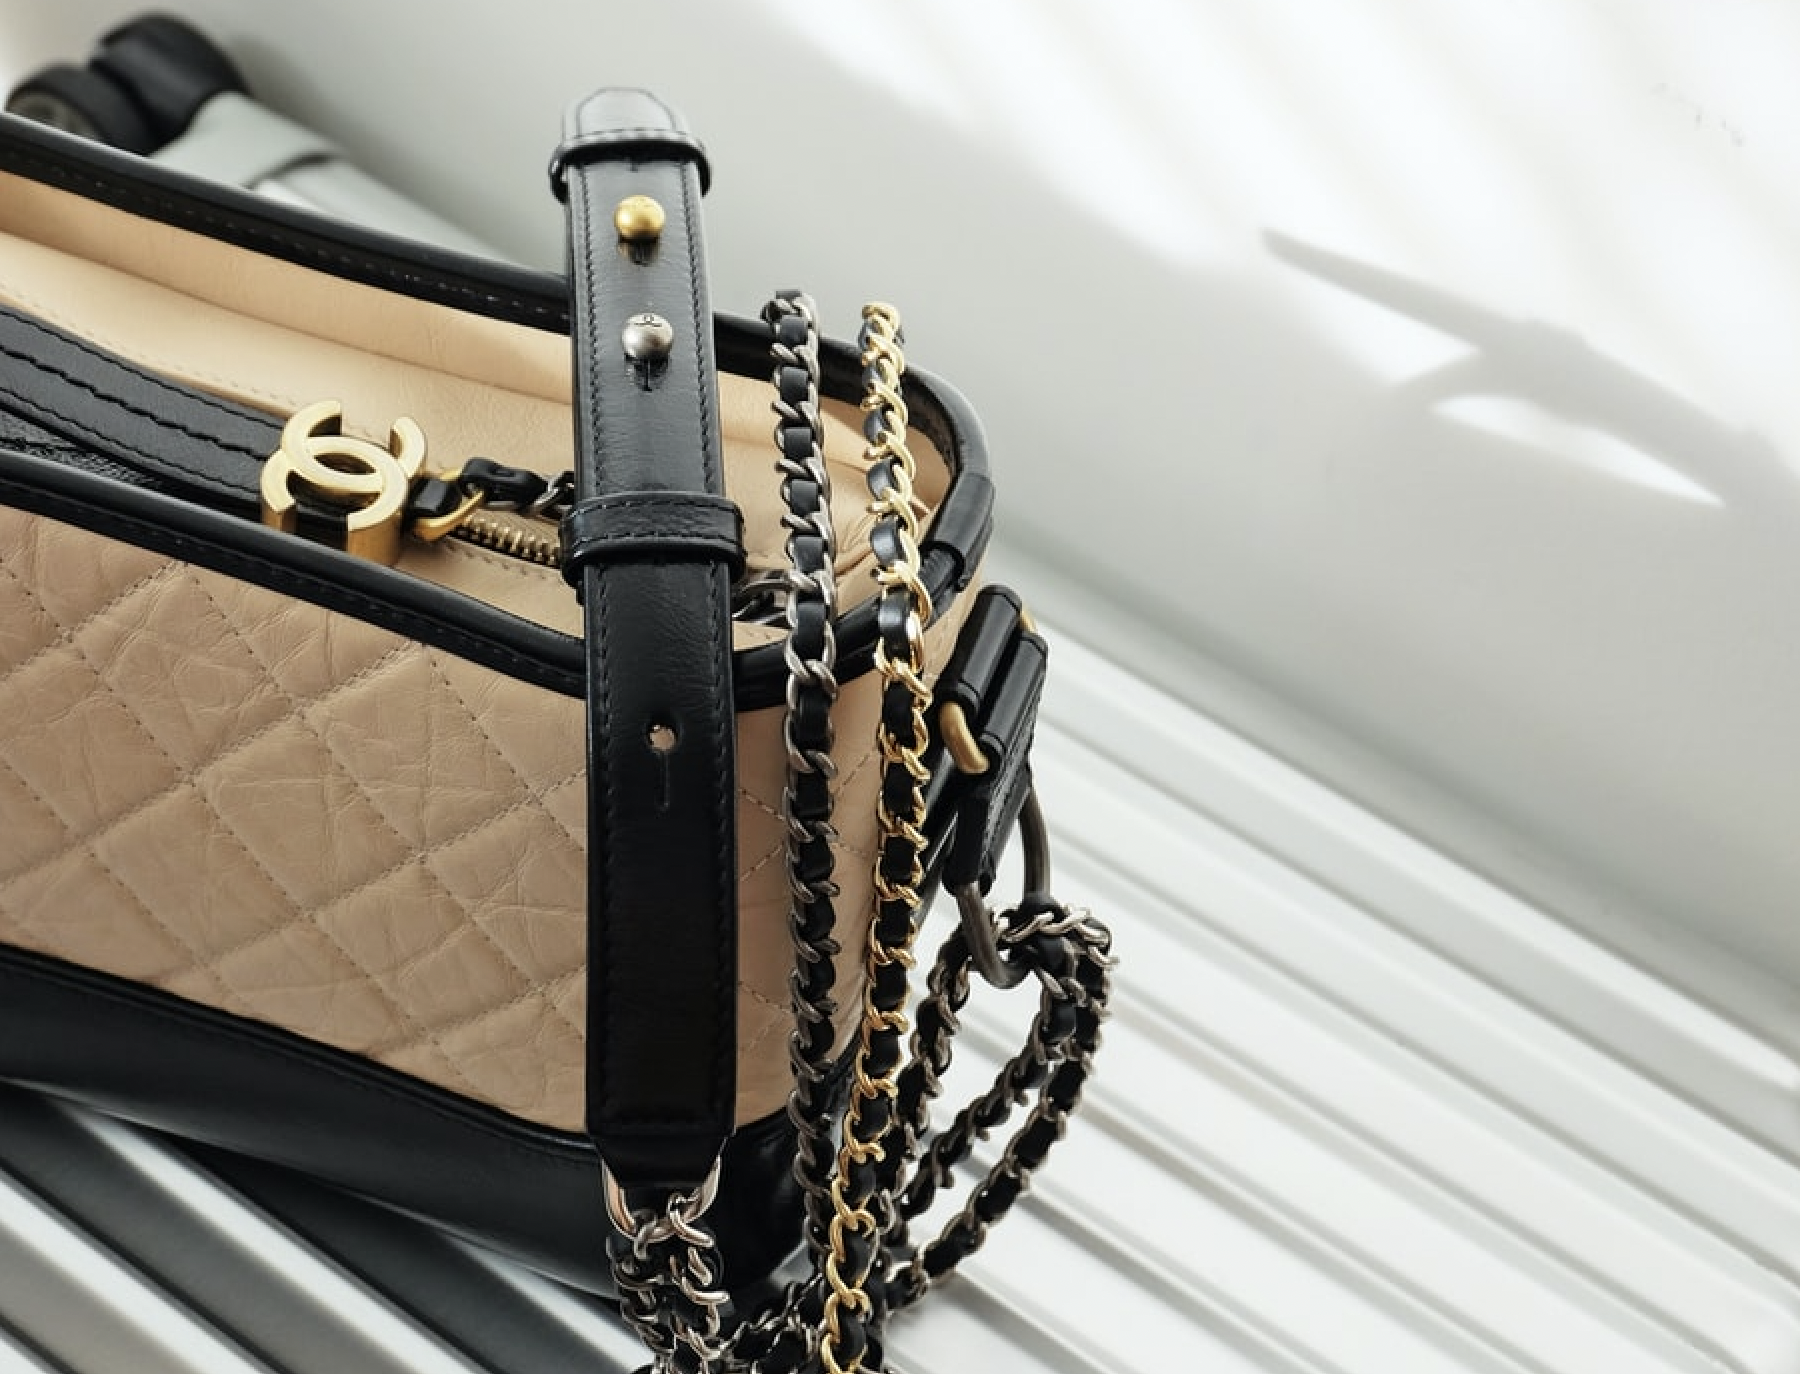 Resale Site Says Chanel Lacks Basis in Case Over Use of the Chanel